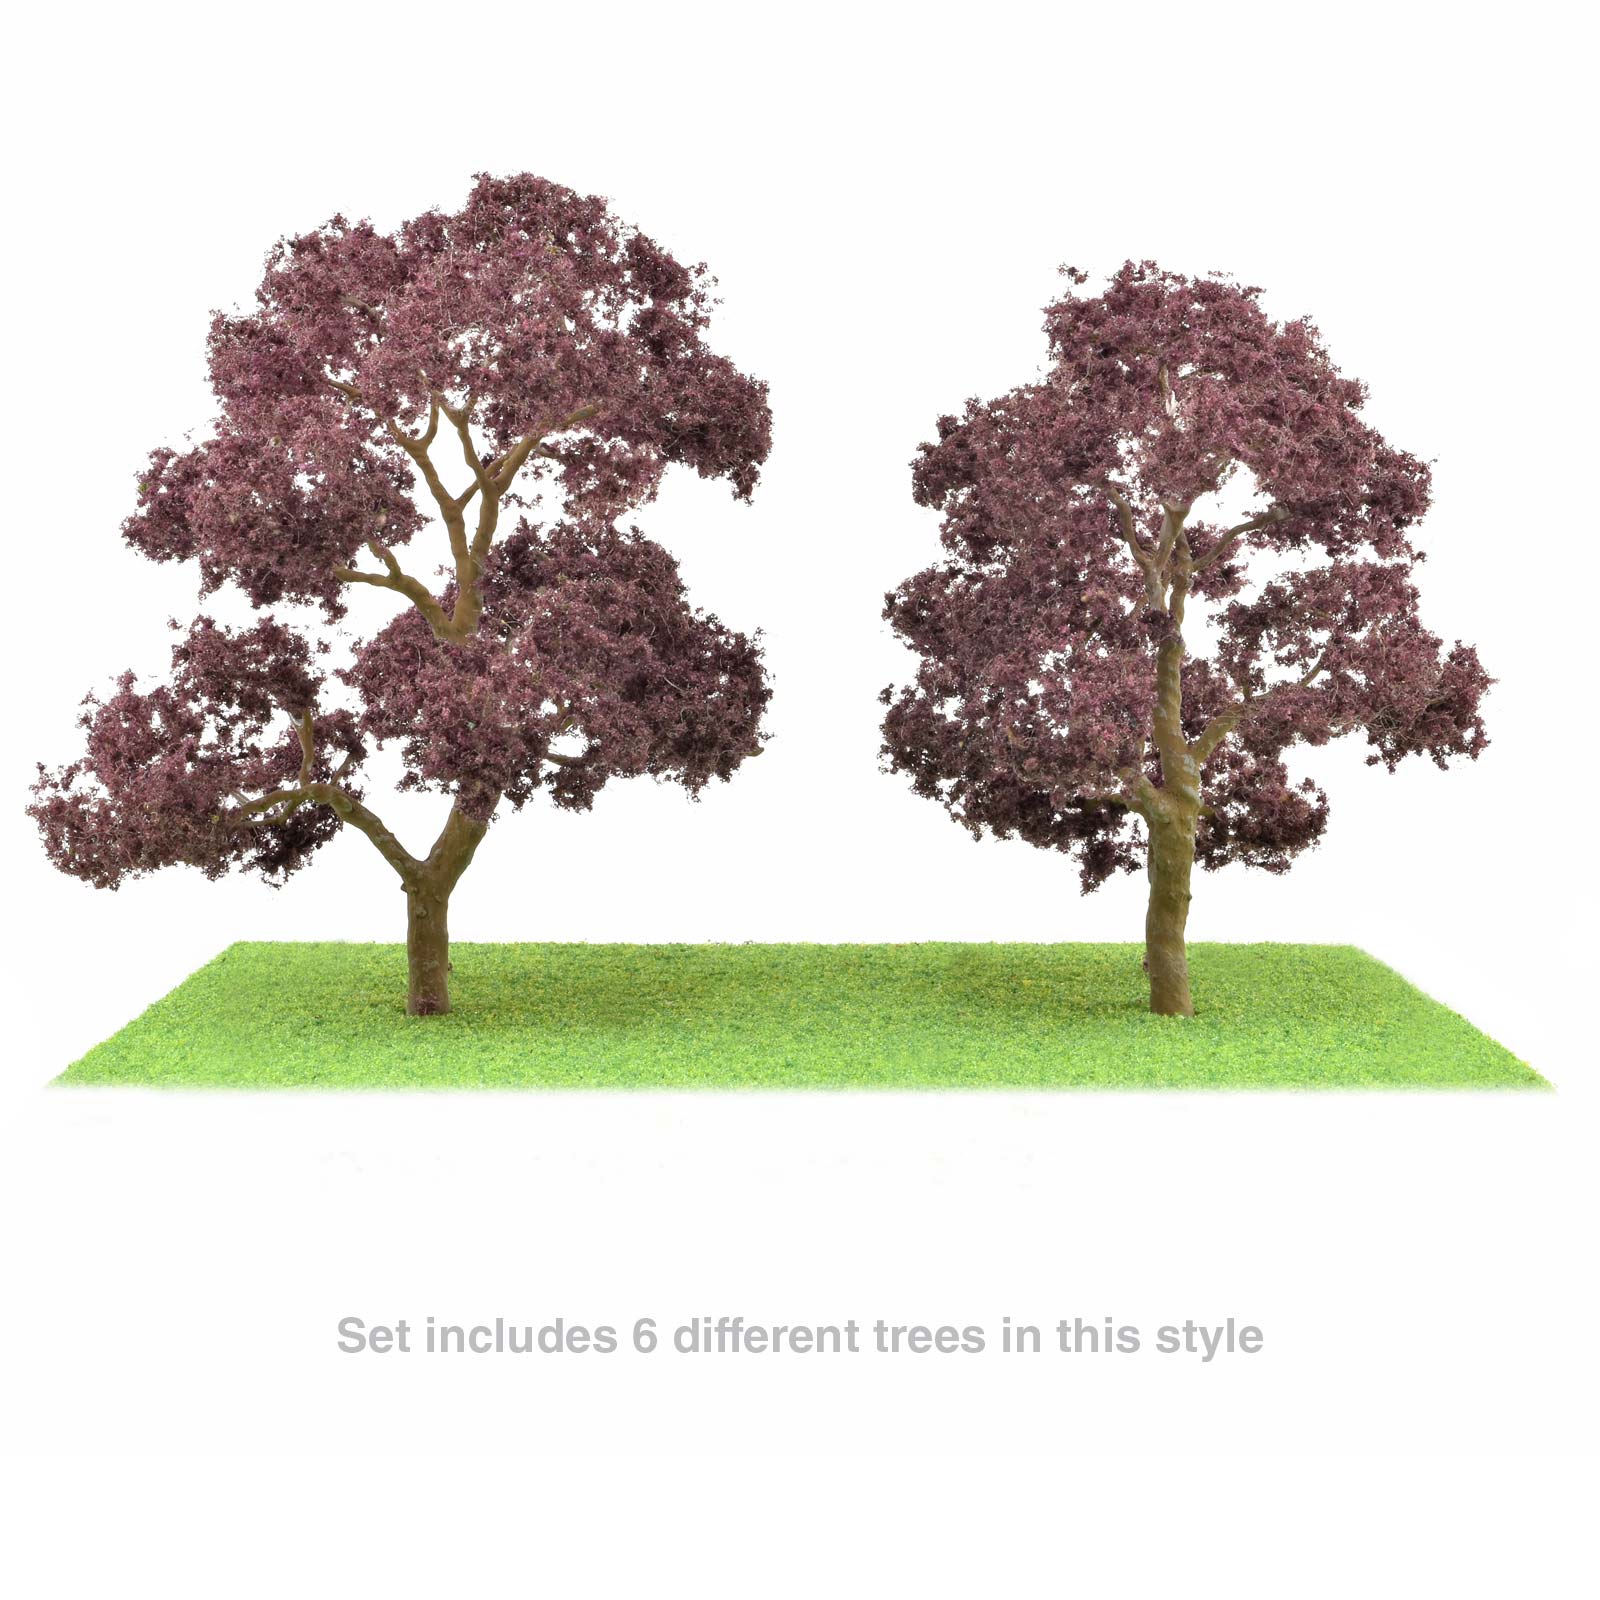 JTT Scenery Products Beech Tree Grove 3 - 3 1/2" High, 6 Pieces